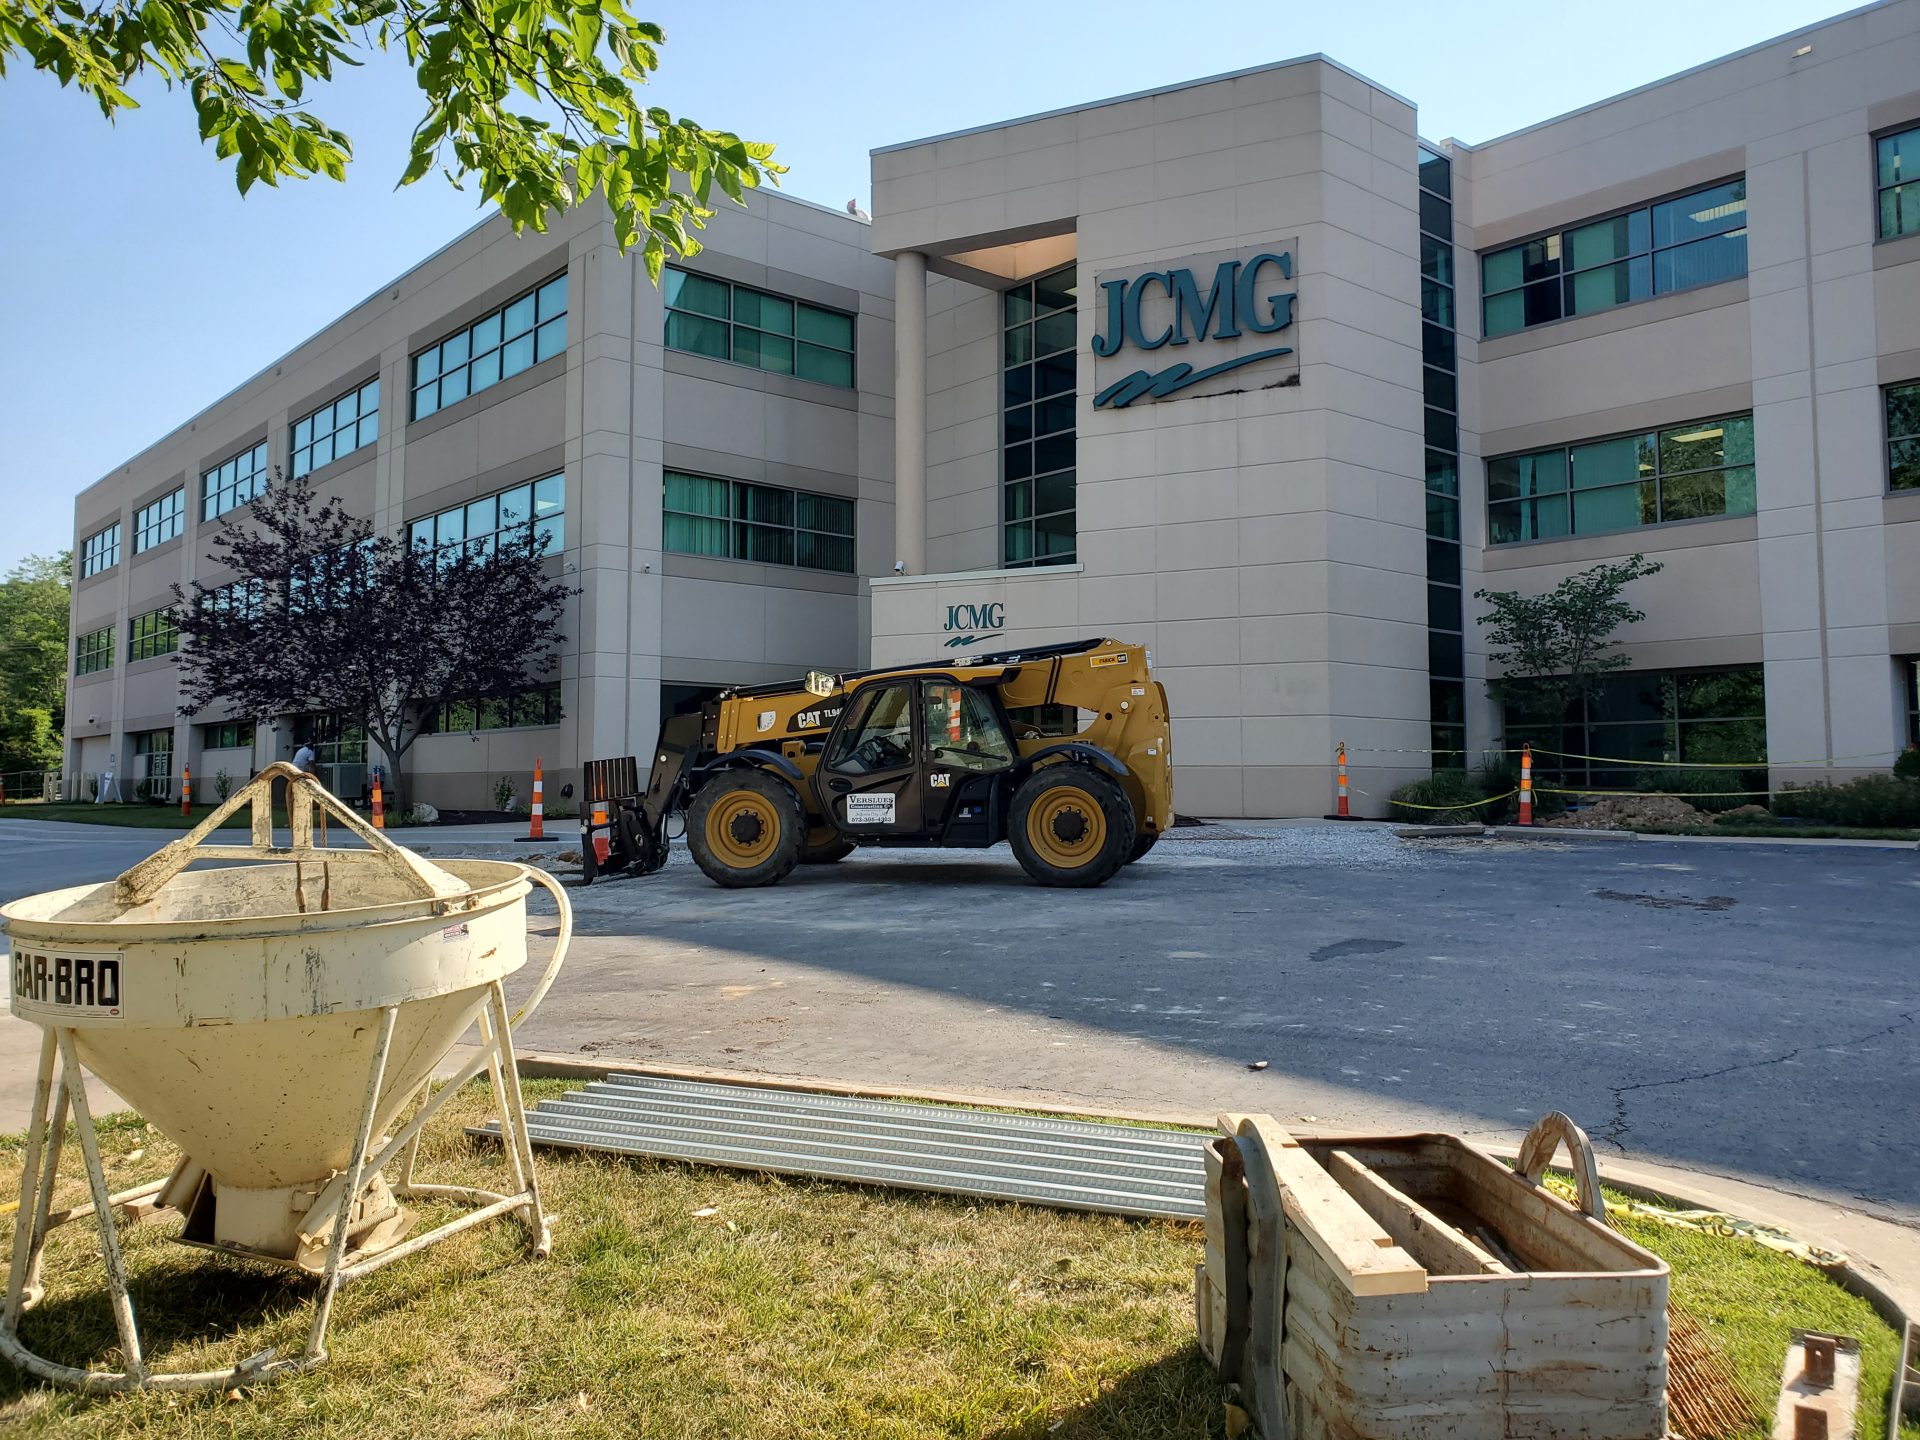 Dialysis Clinic moving into JCMG’s main facility in Jefferson City